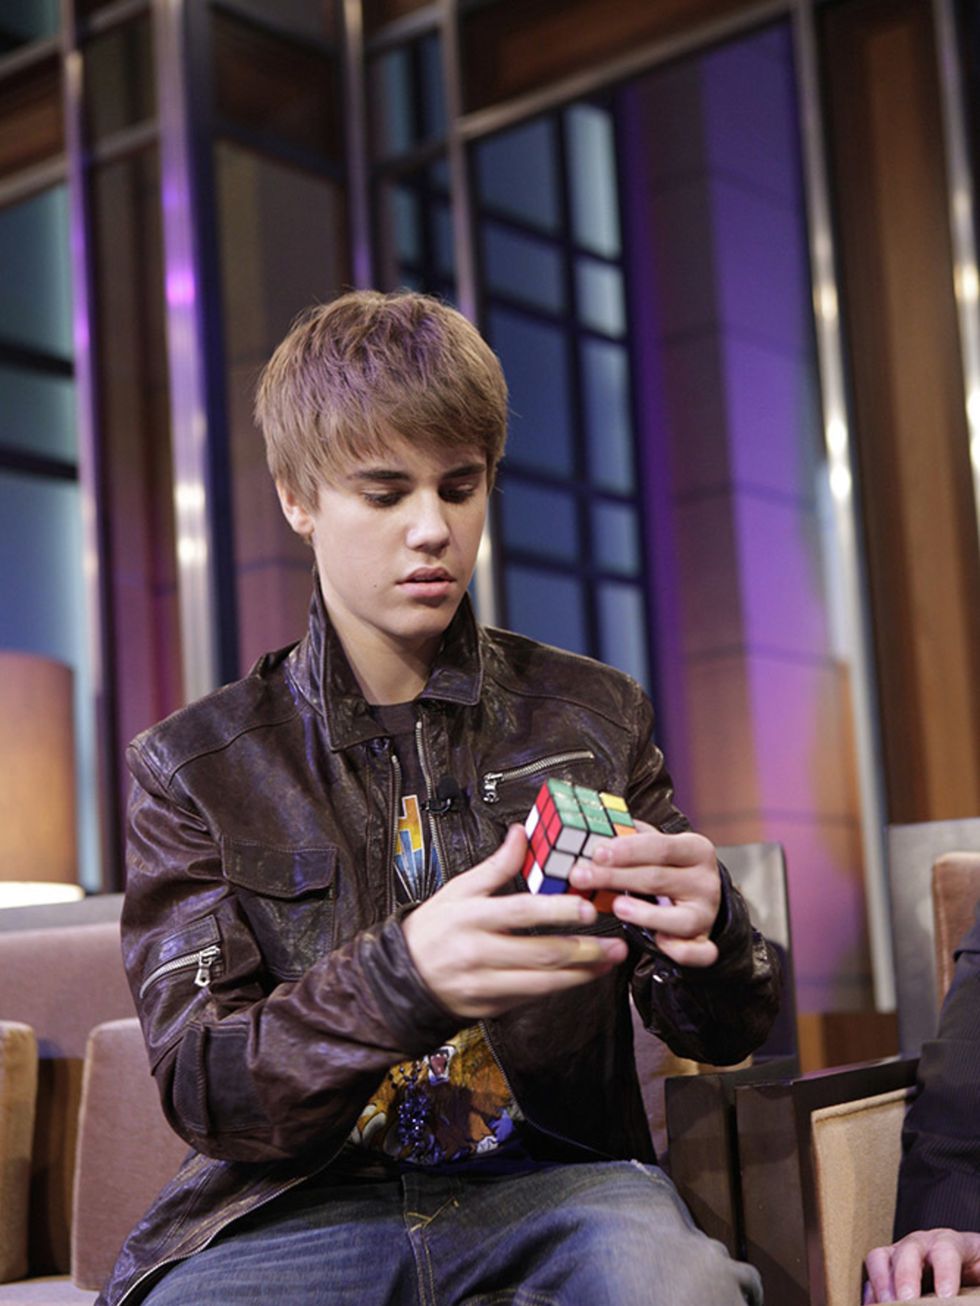 <p>Justin Bieber can solve a rubik's cube in 84 seconds. That's only 79 seconds off the world record.</p>